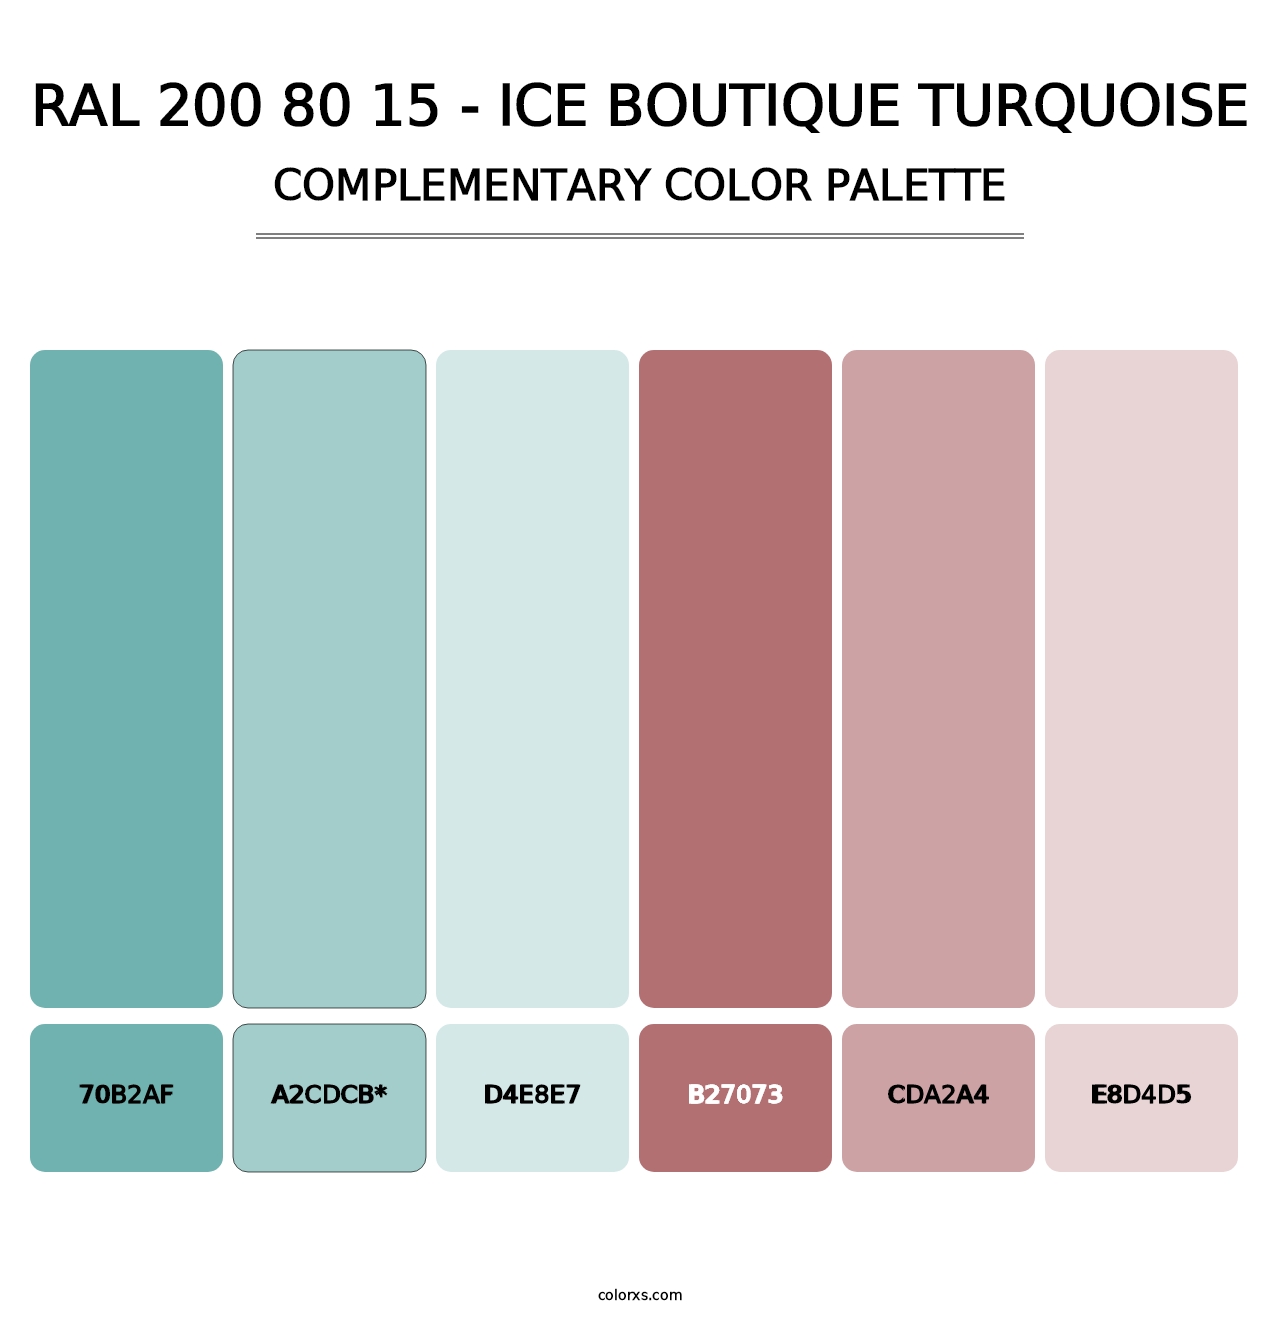 RAL 200 80 15 - Ice Boutique Turquoise - Complementary Color Palette